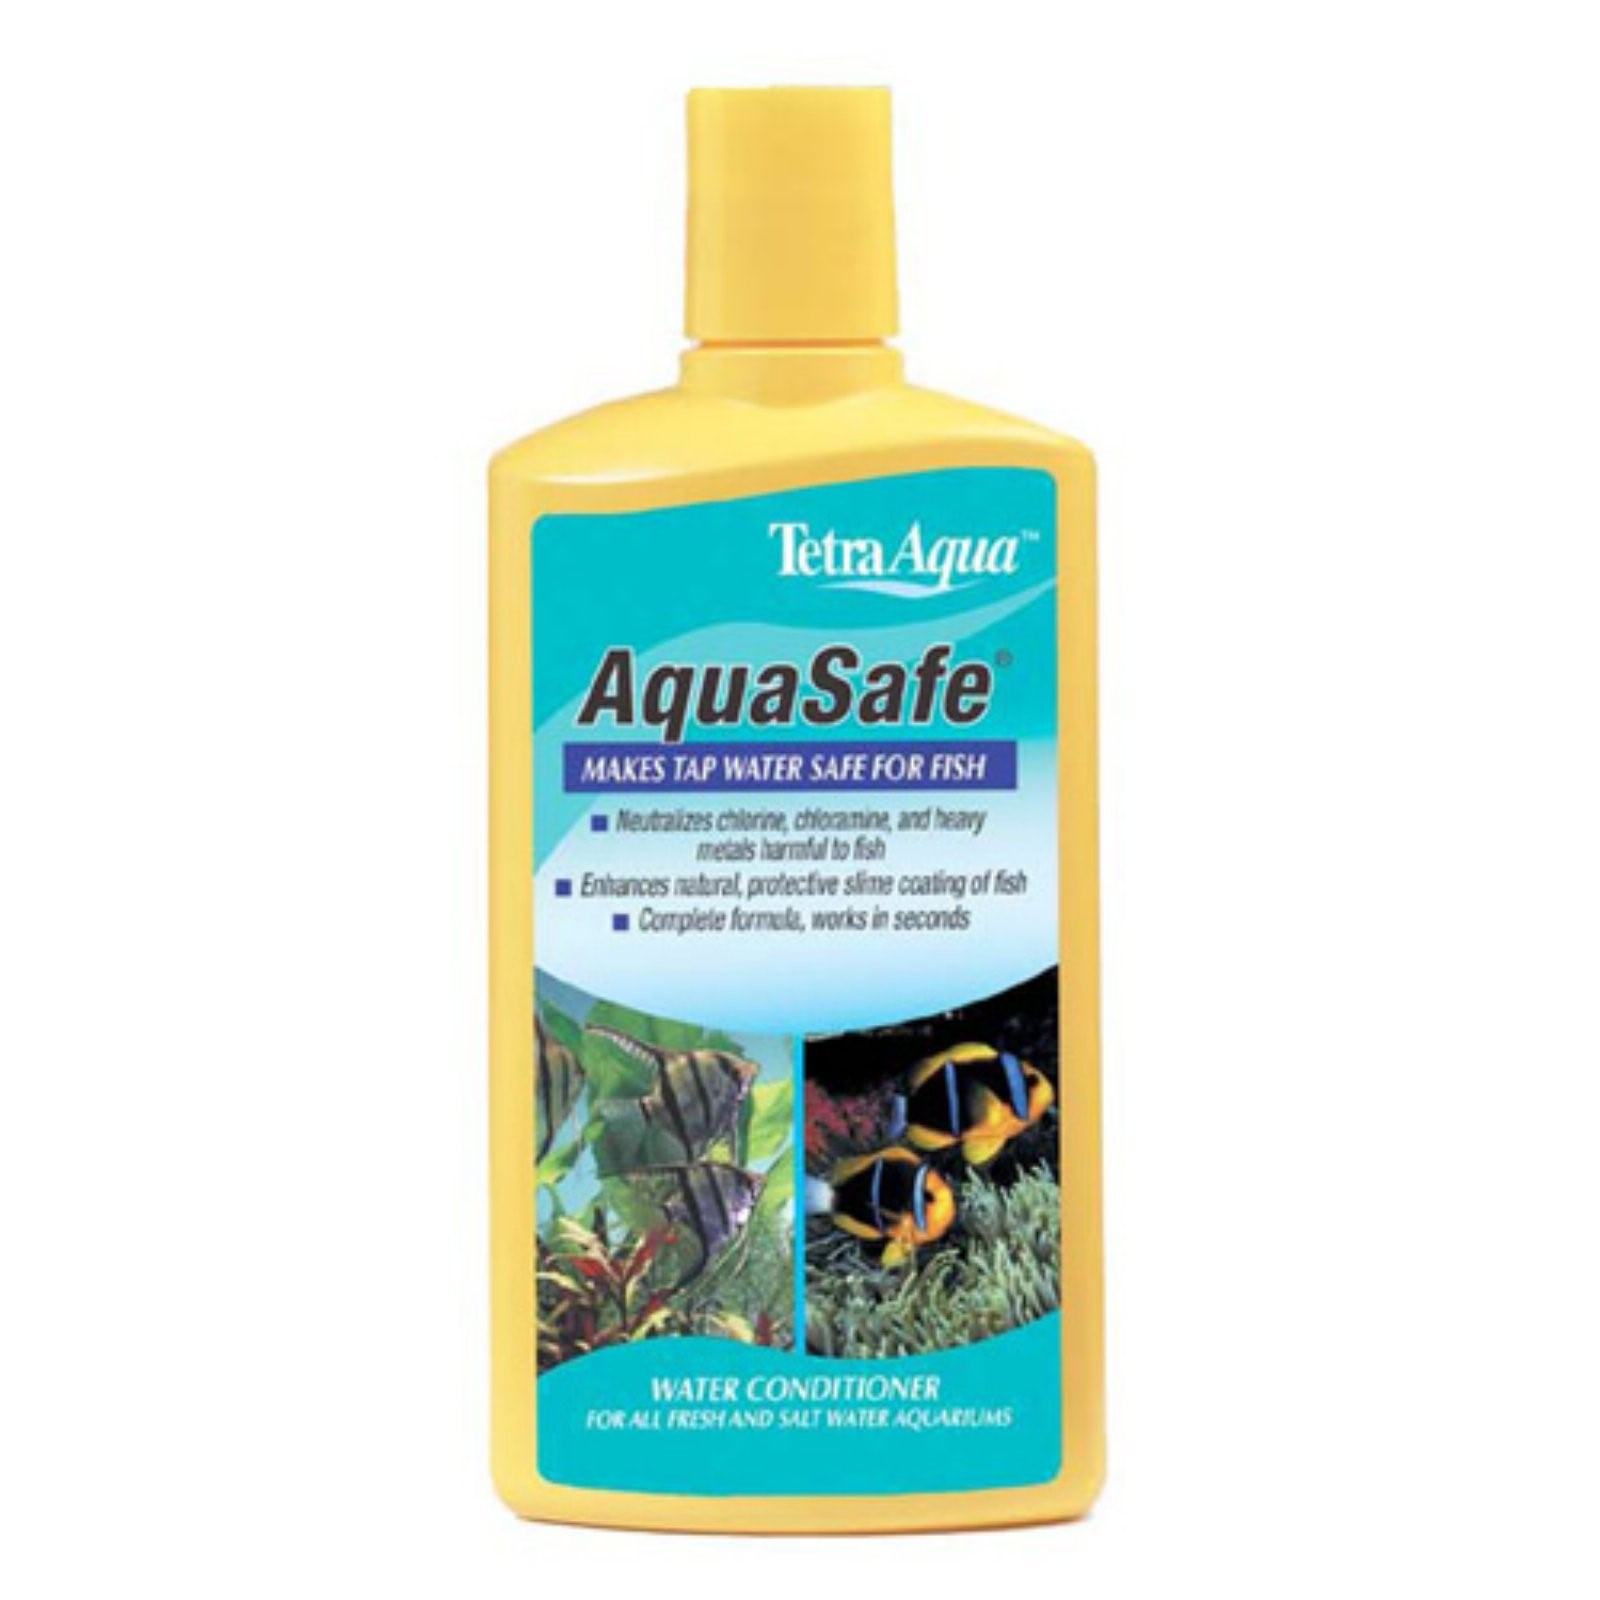 aquasafe for reptiles and amphibians